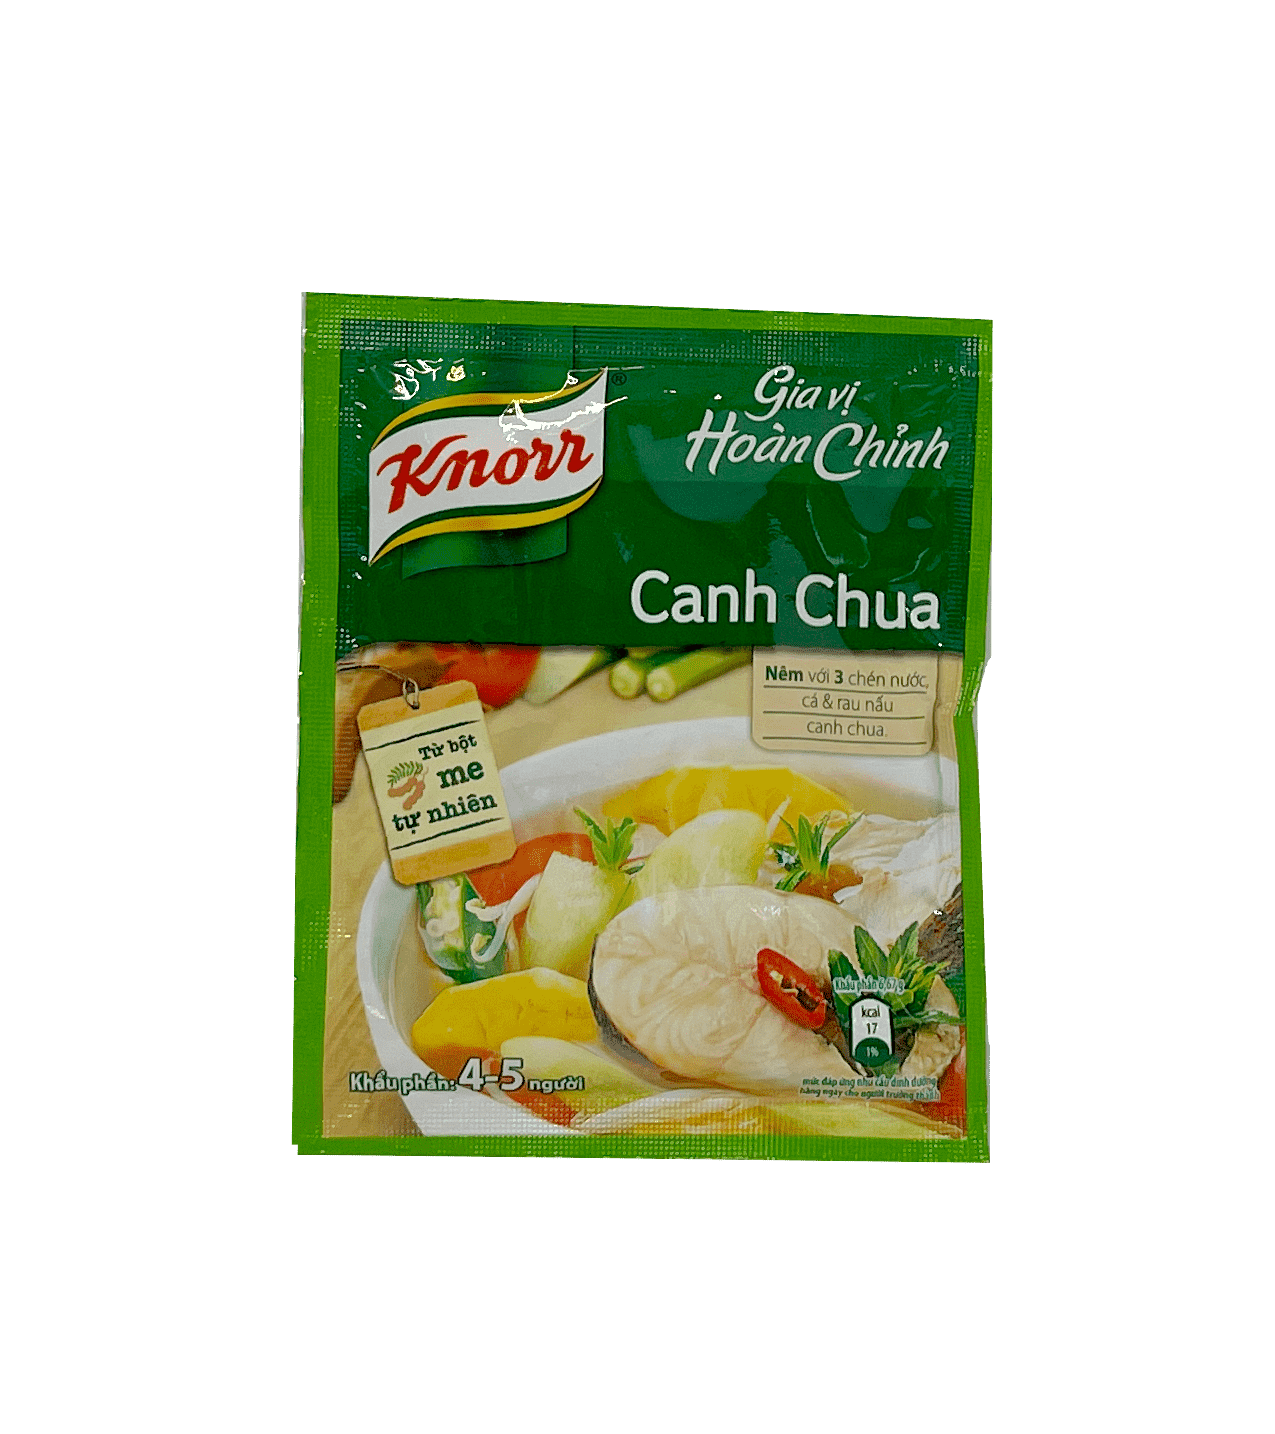 Best Before: 2022.10.10 Broth Gia Vi Canh Chua 30g Knorr Vietnam